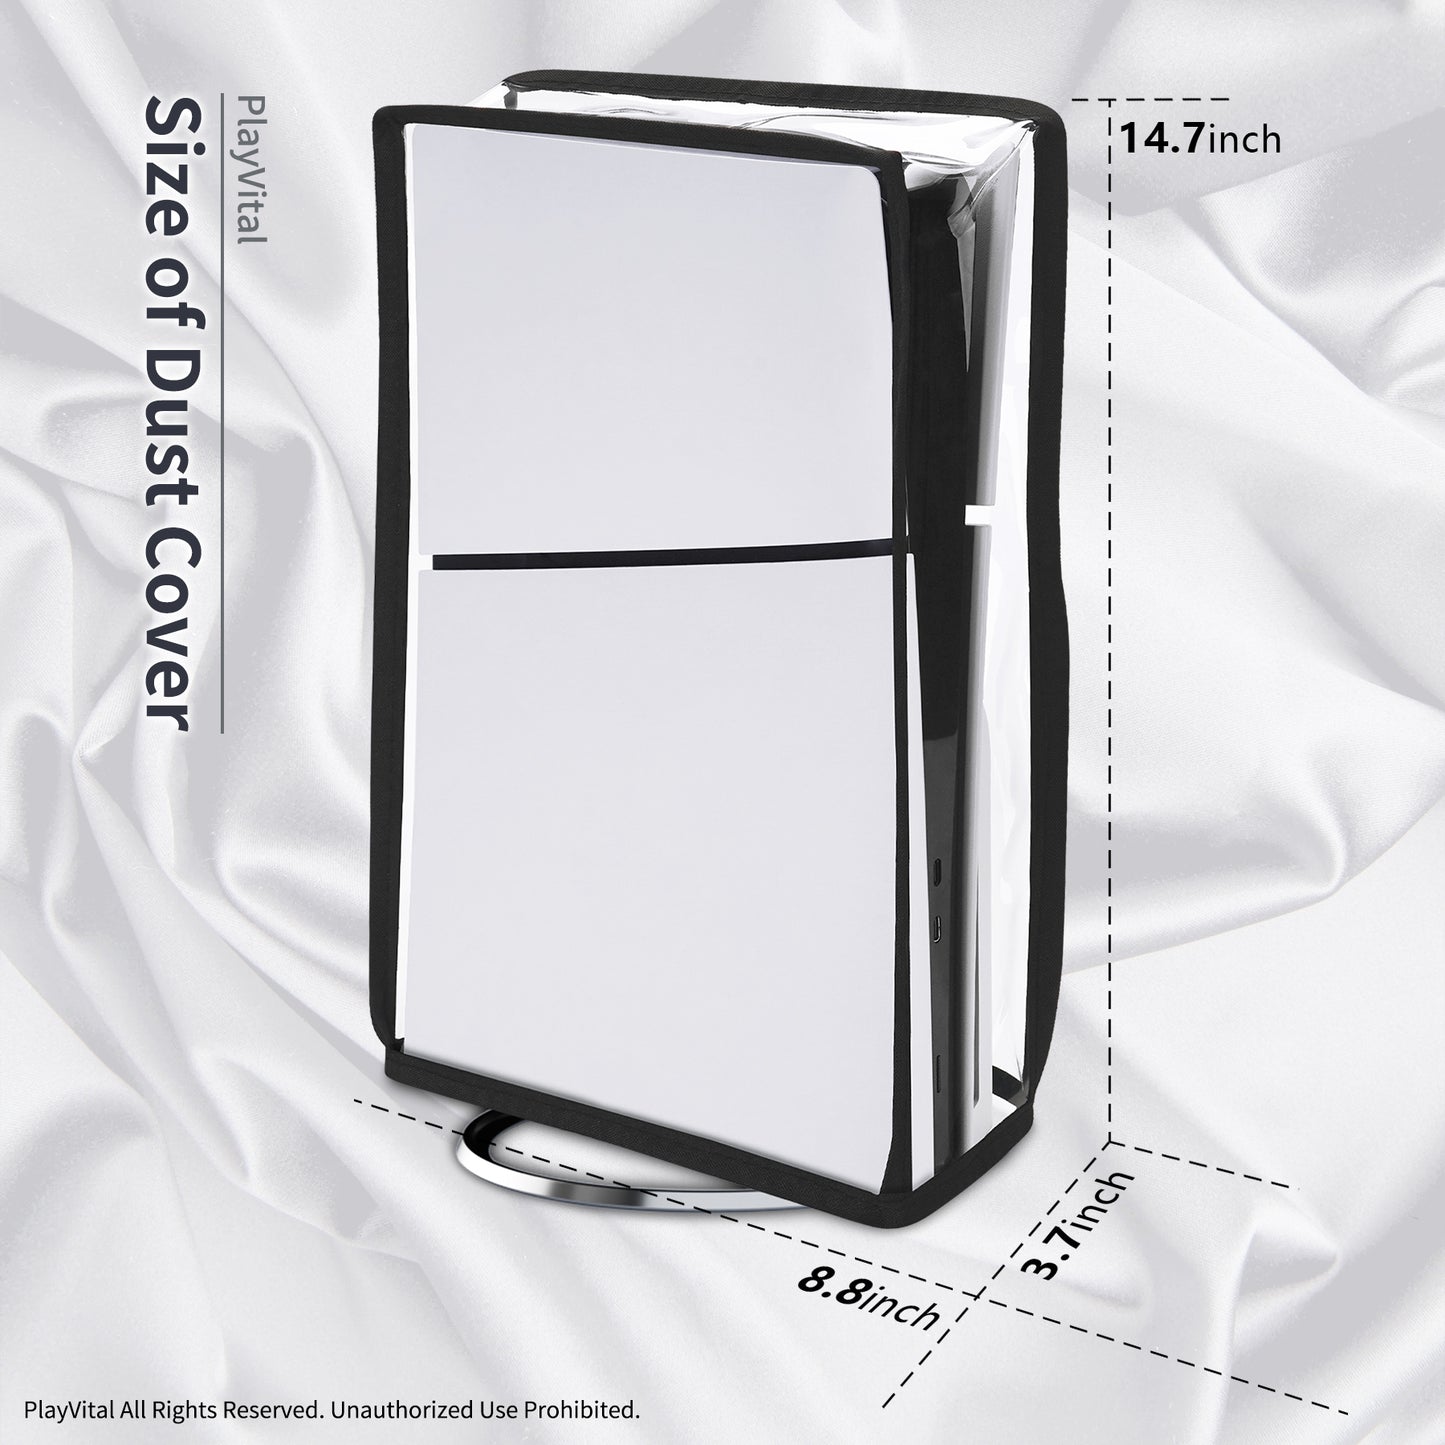 PlayVital Vertical Dust Cover for ps5 Slim Disc Edition(The New Smaller Design), Transparent Dust Proof Protector Waterproof Cover Sleeve for ps5 Slim Console - BMYPFM003 PlayVital